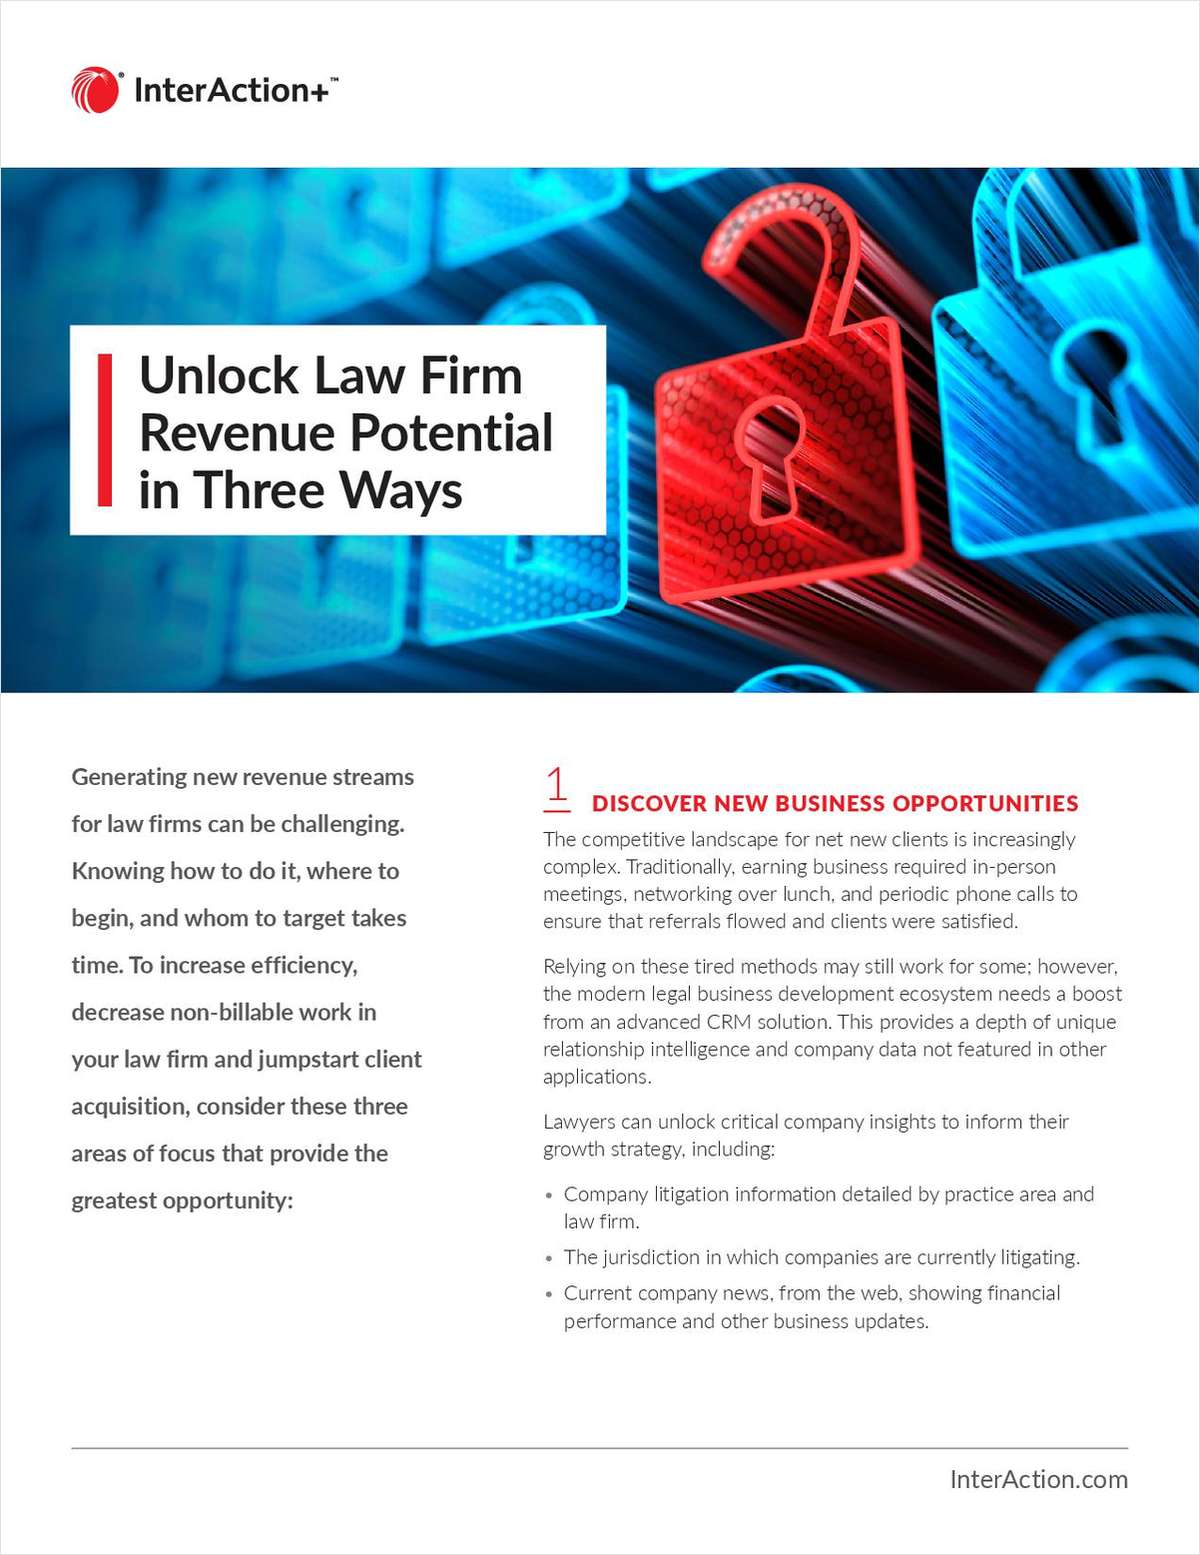 Generating new revenue streams for law firms can be challenging. Download this white paper to discover three areas of focus that provide the greatest opportunity for your firm to unlock revenue potential.